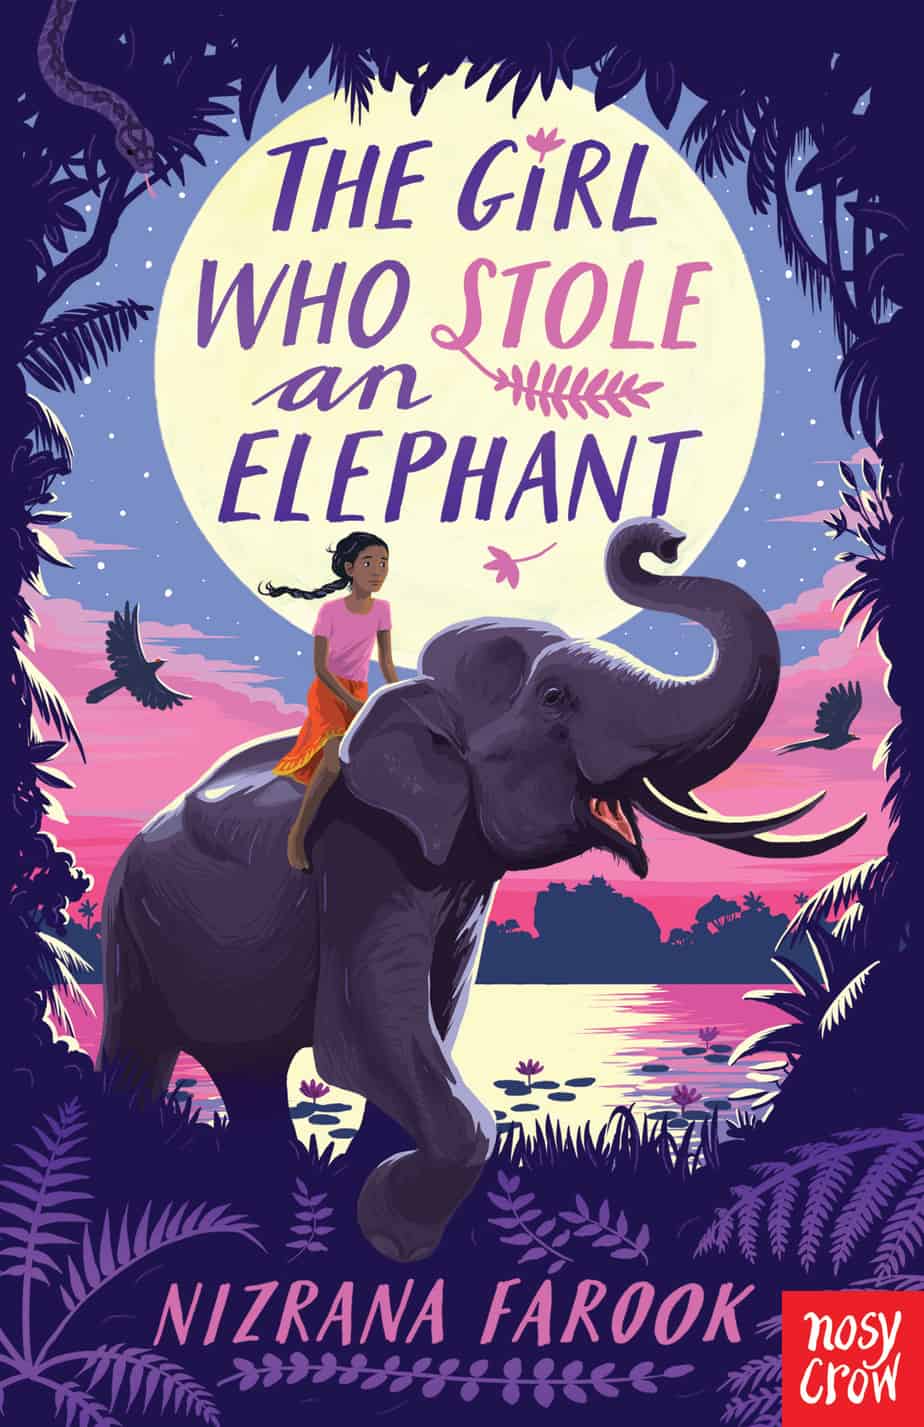 Chaya, a no-nonsense, outspoken hero, leads her friends and a gorgeous elephant on a noisy, fraught, joyous adventure through the jungle where revolution is stirring and leeches lurk. Will stealing the queen’s jewels be the beginning or the end of everything for the intrepid gang?